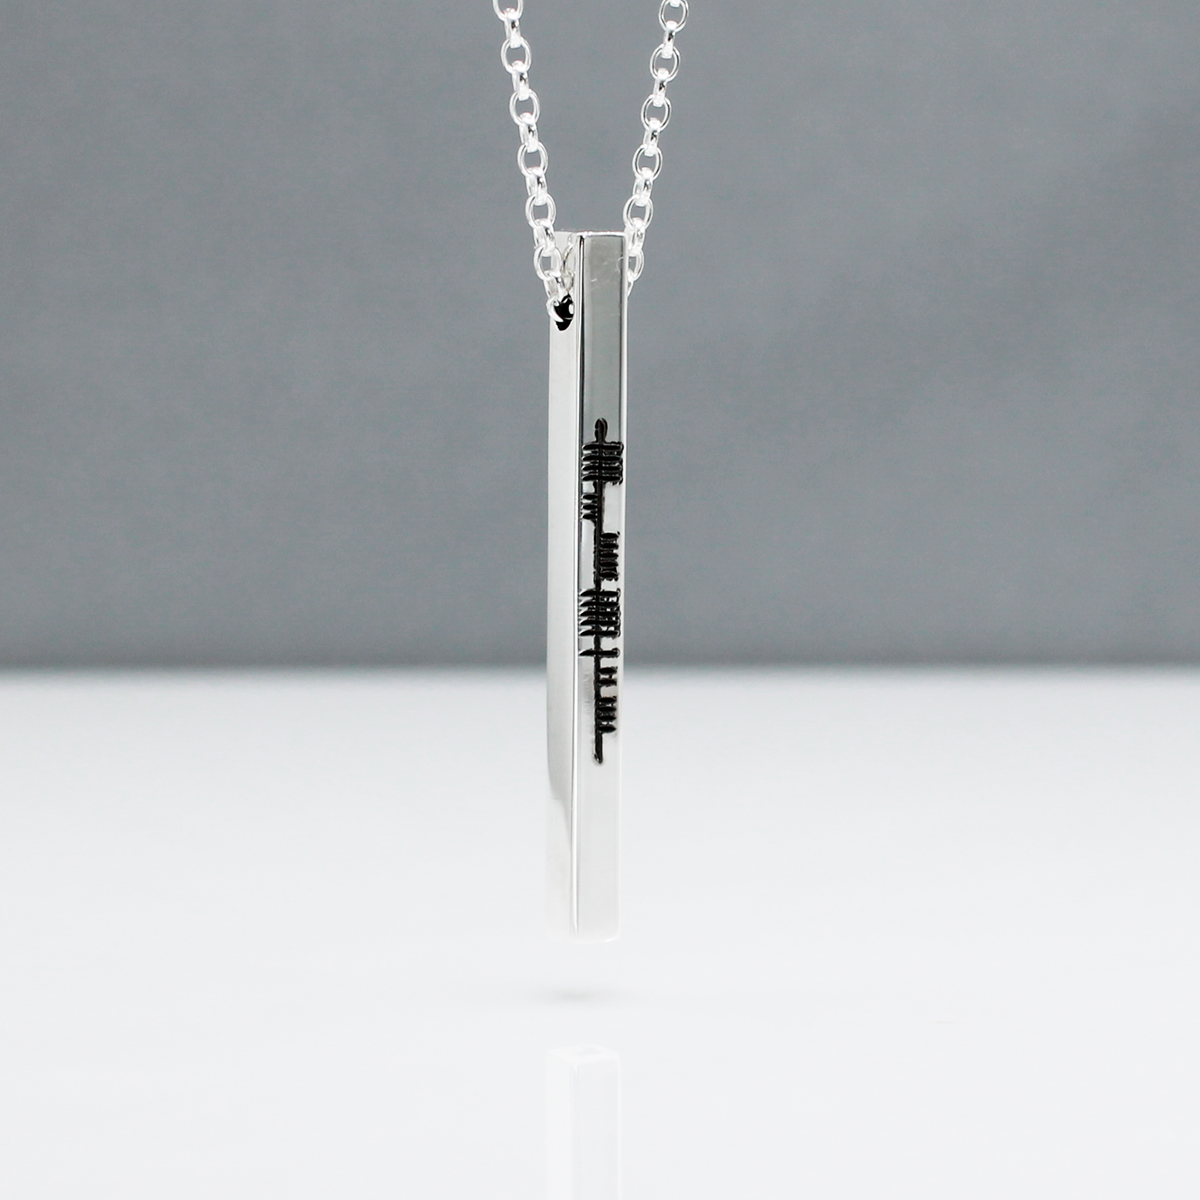 Our EIRE - Ogham Sláinte High Polished Bar Silver Pendant elegantly showcases intricate Ogham script spelling out the Irish word "Sláinte," a traditional toast meaning "health" in English. This word is often used when raising a glass in celebration or to wish good health to others.